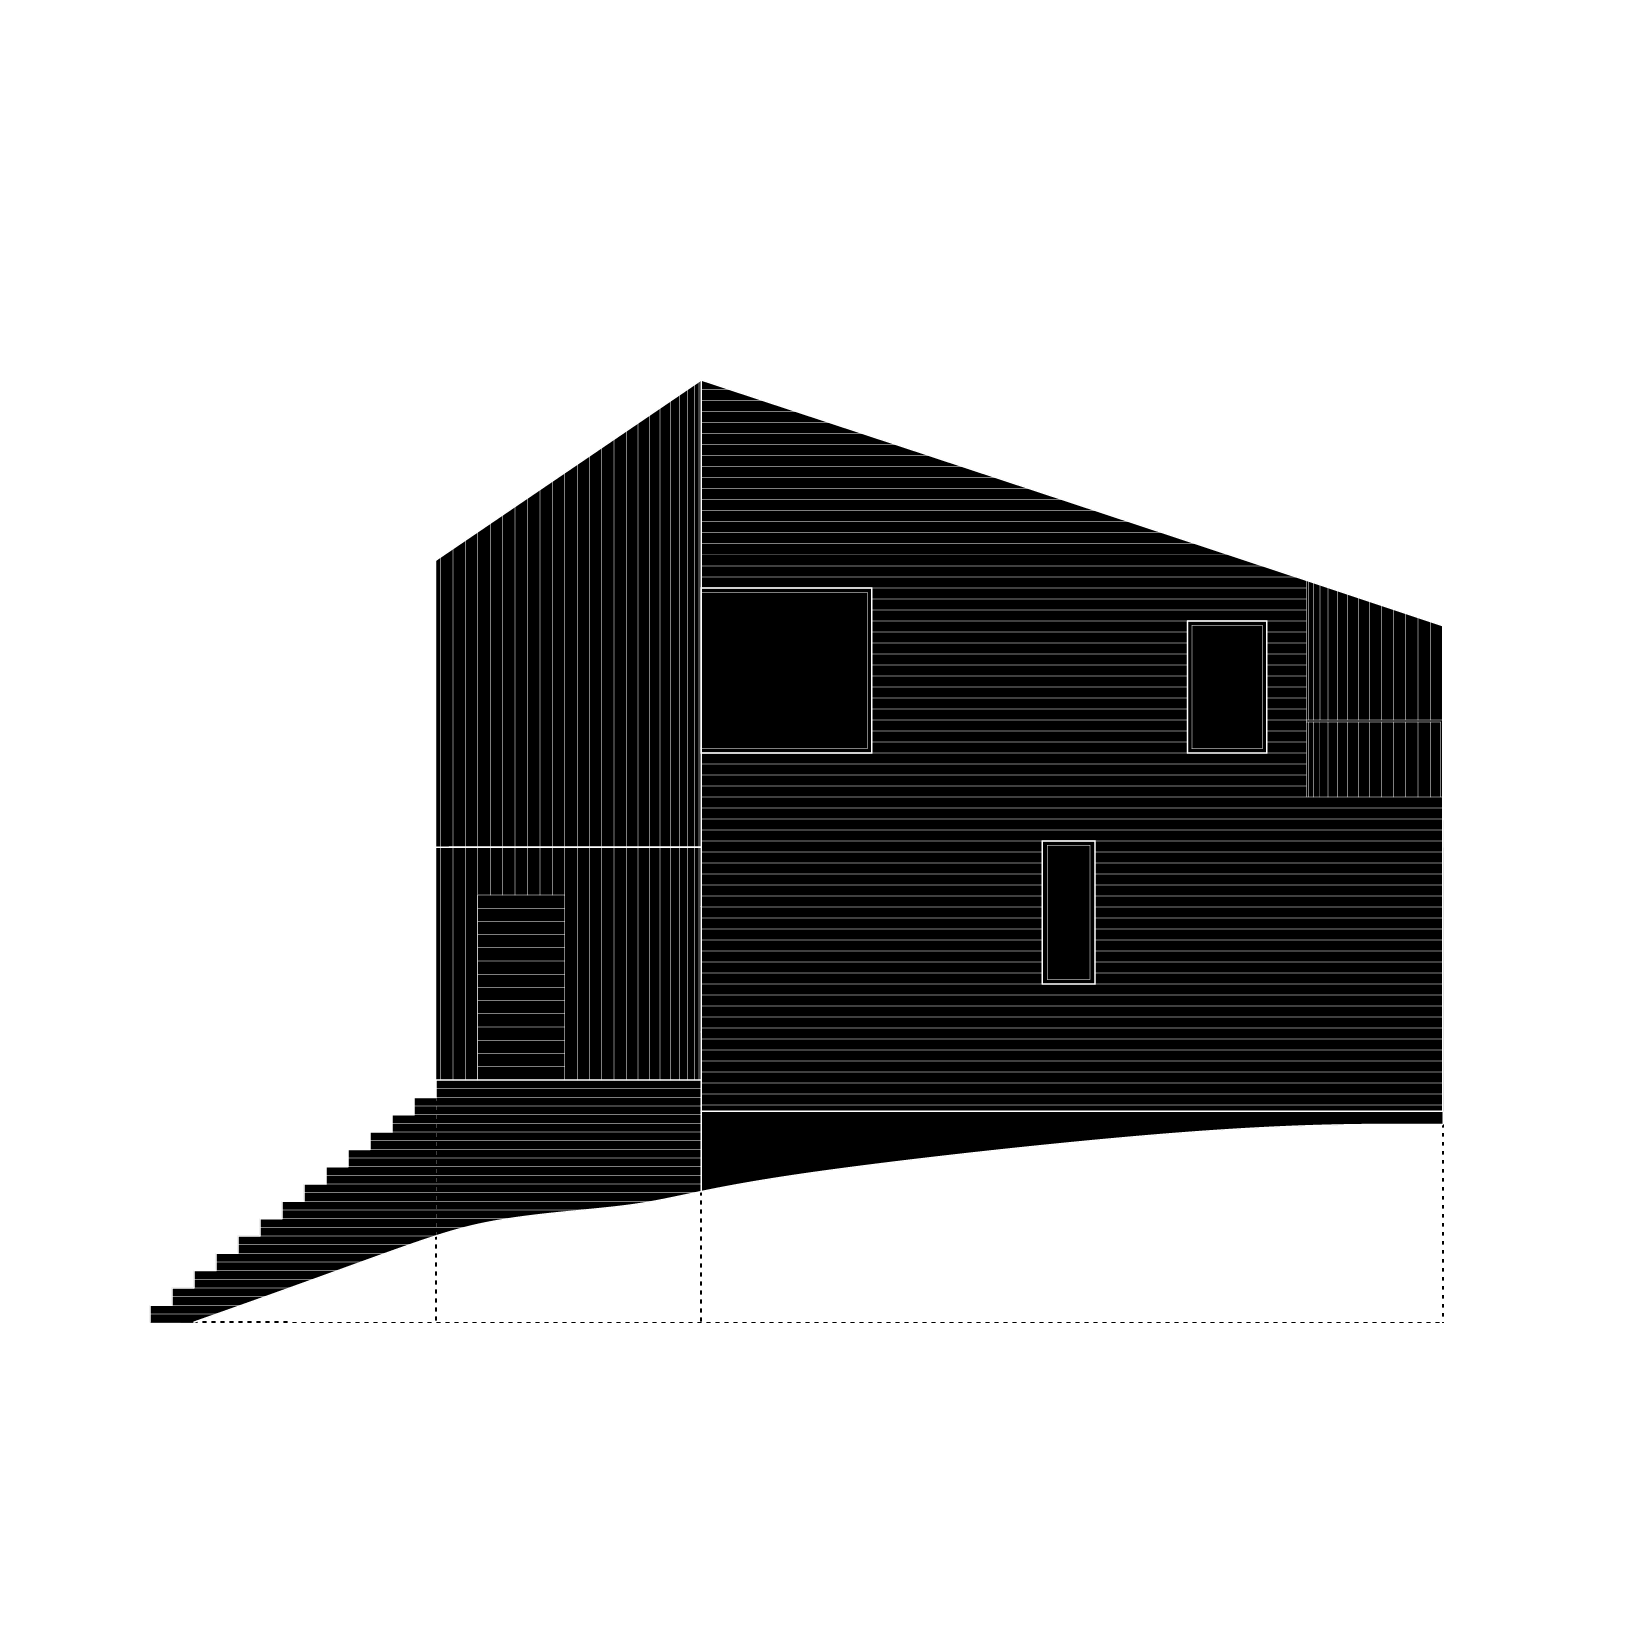 2021.02.01 - Plans and Elevations-03.png